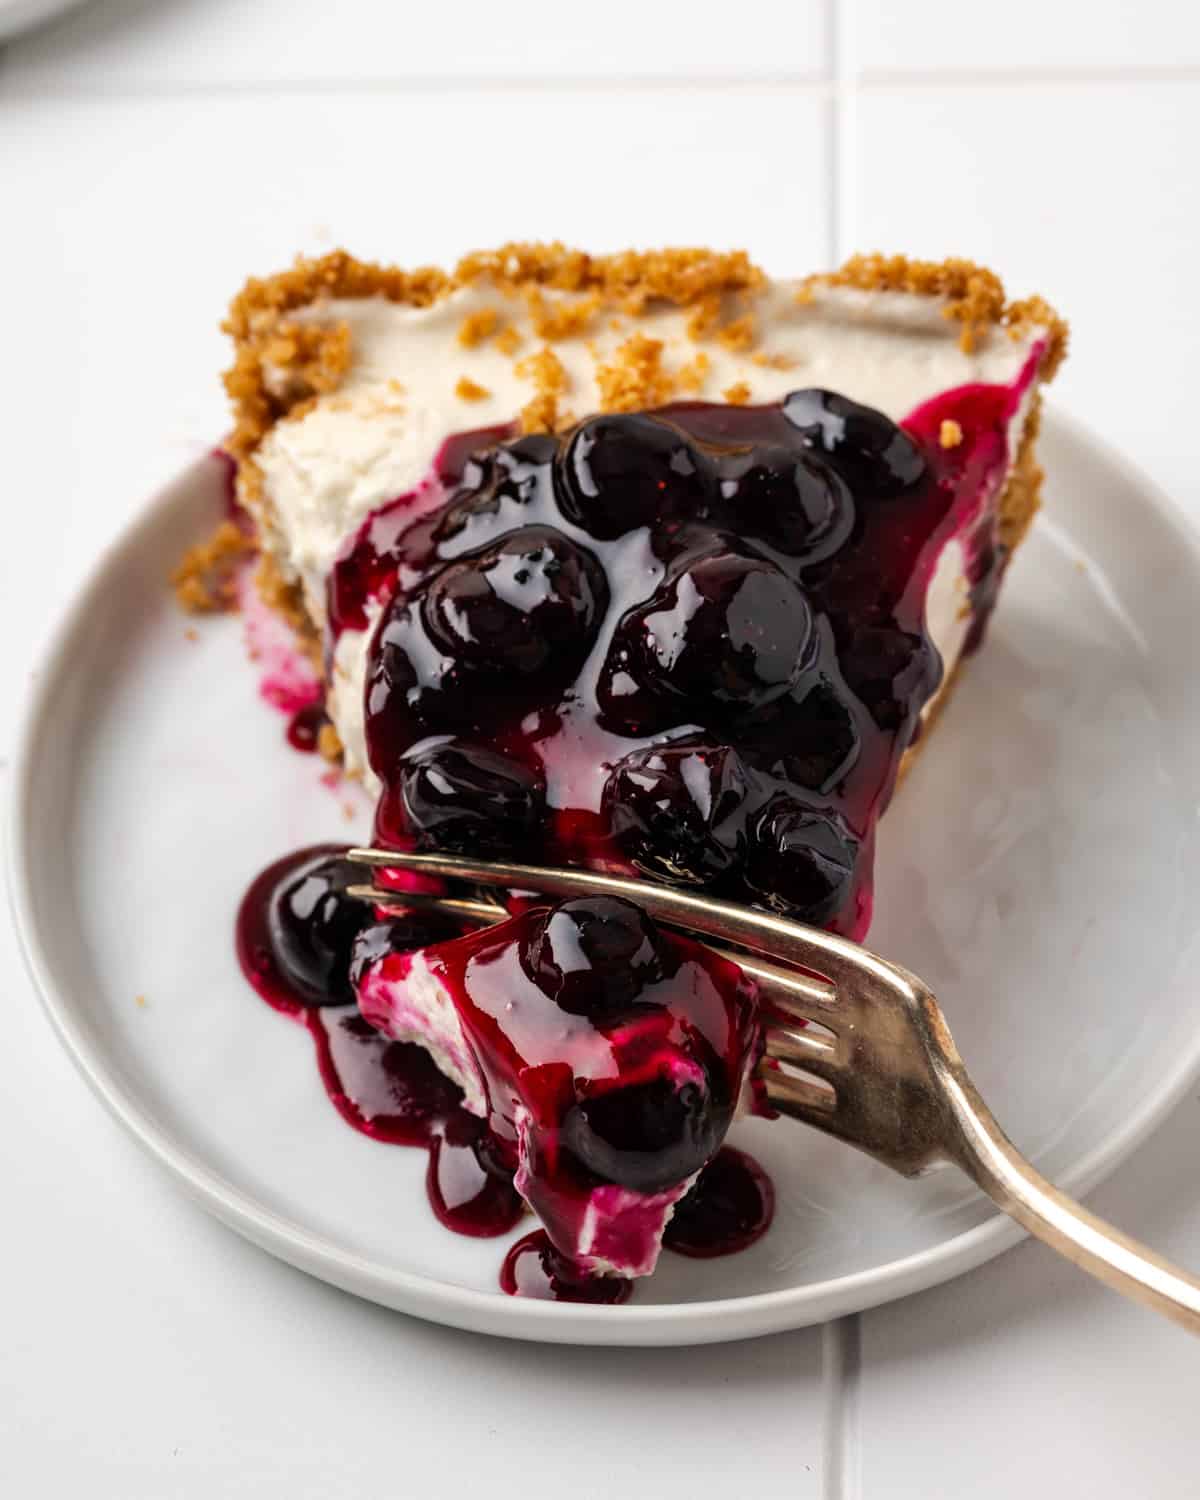 A bite being cut out of a slice of no bake blueberry cheesecake sitting on a white plate.